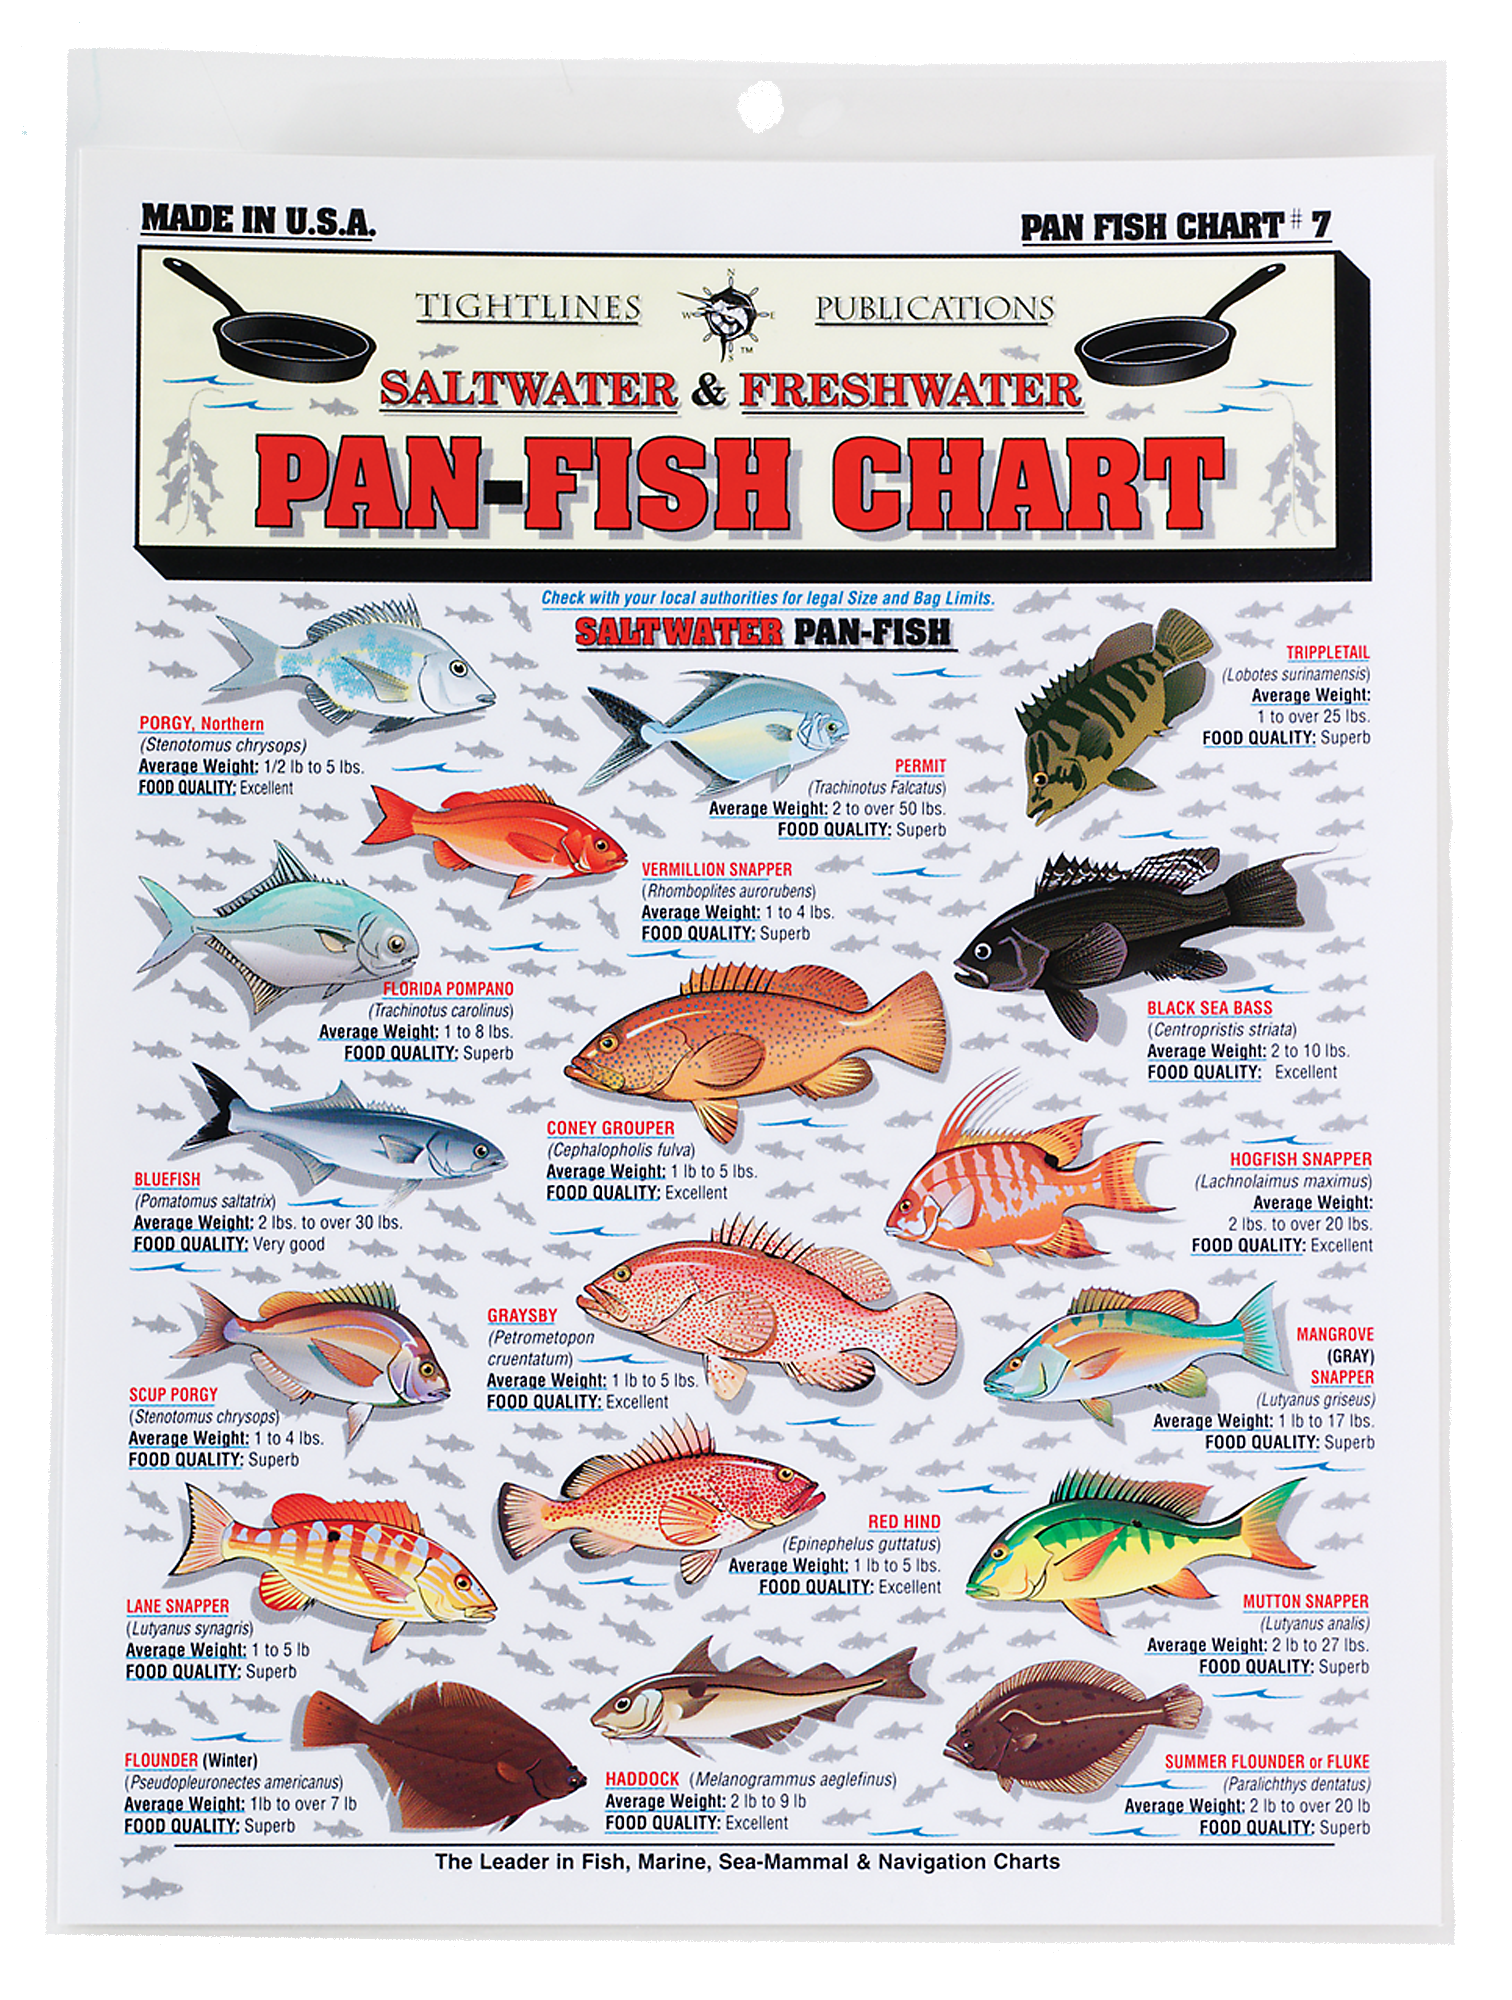 Freshwater and Saltwater Pan-Fish Chart #7